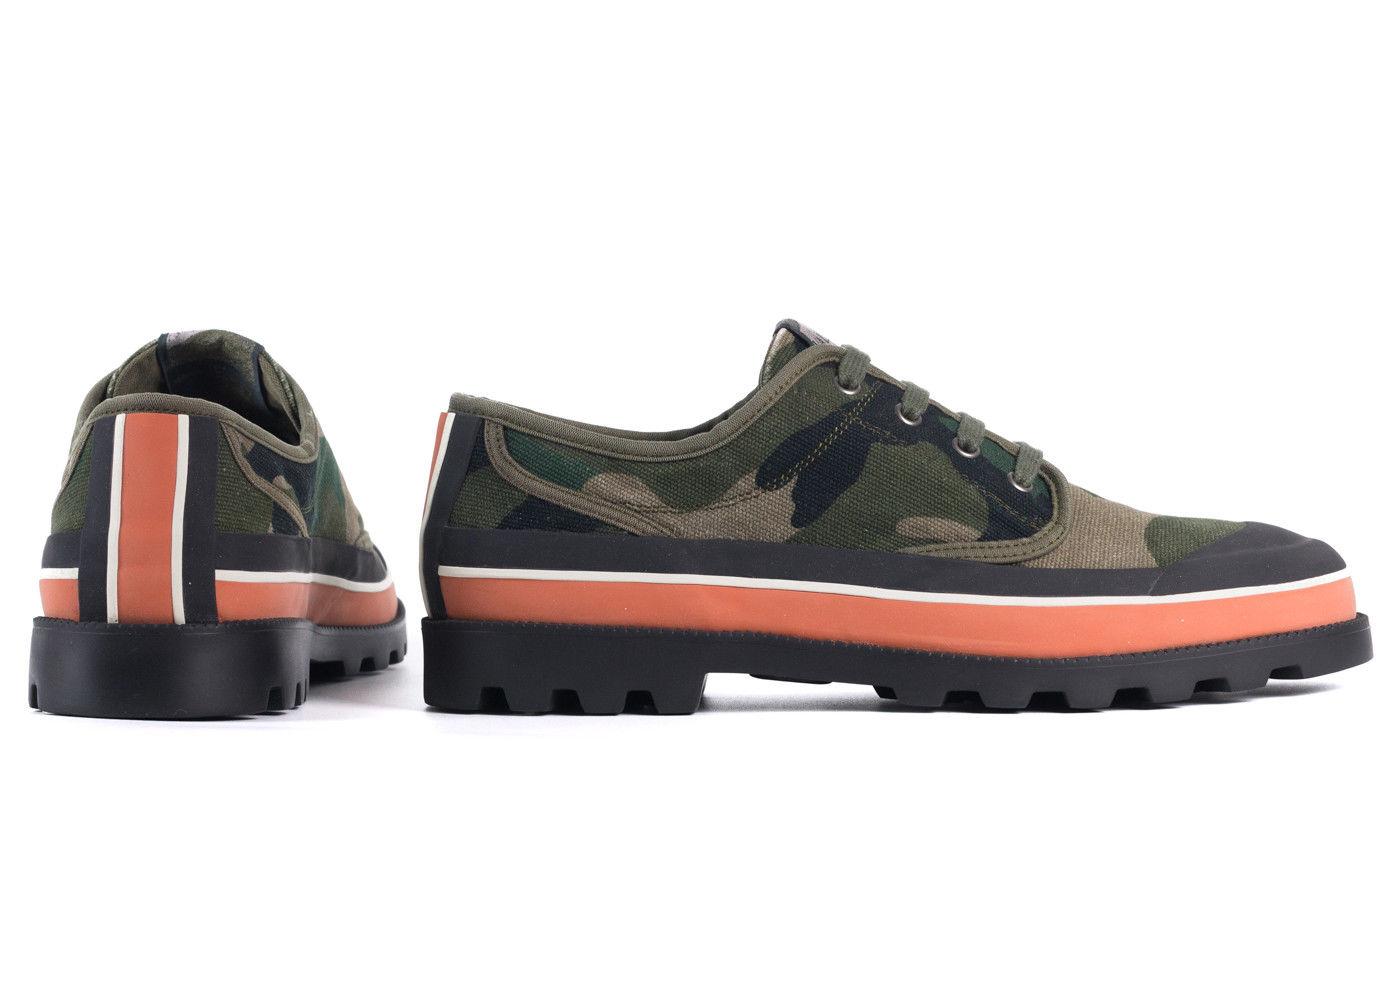 The camouflage id sneakers are perfect for that casual outing. The tri color rubber trim protects and updates the core sections of this shoe. You can wear this shoe with all dark denim or khaki brown pants for a transitional feel.



Composition